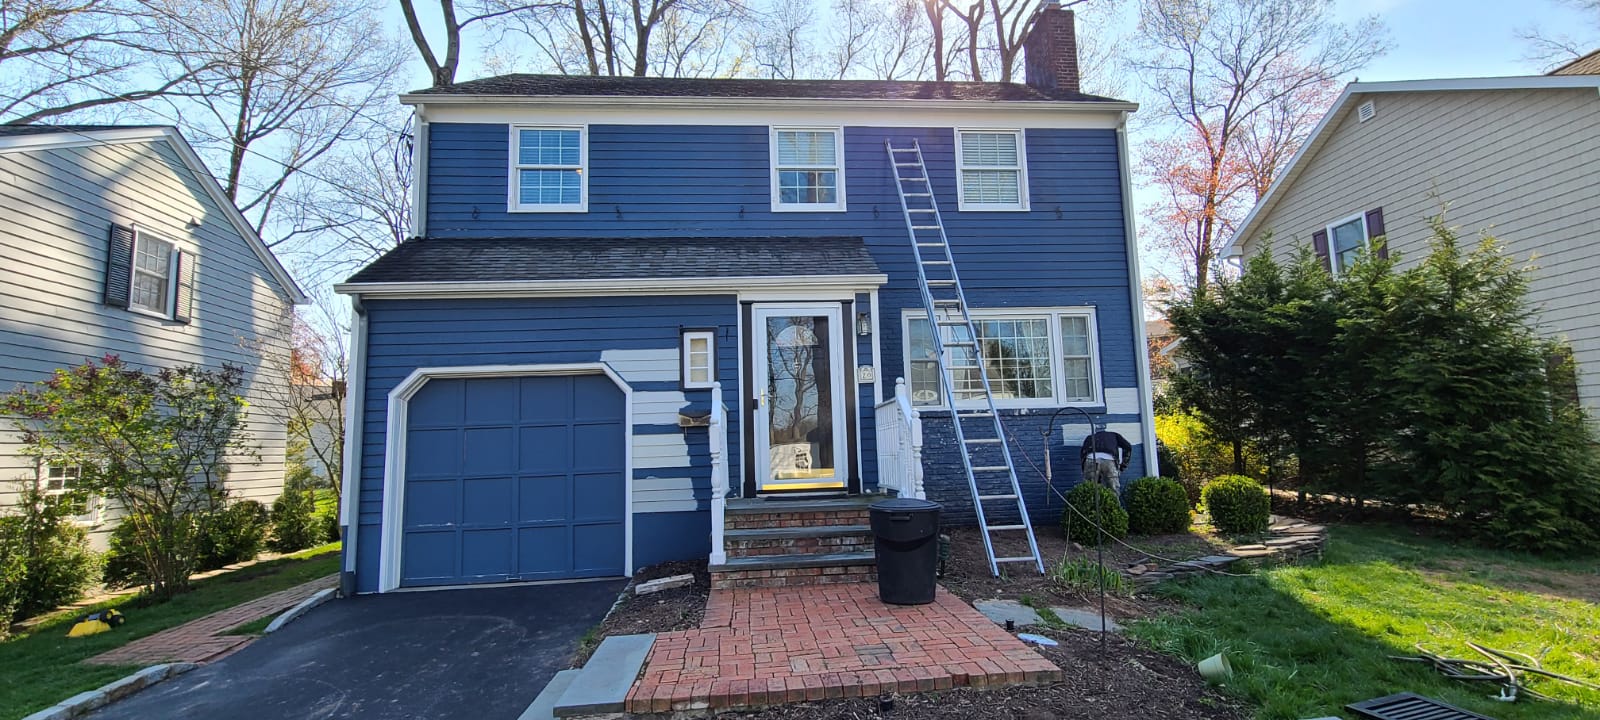 Painting the exterior of a two story house blue